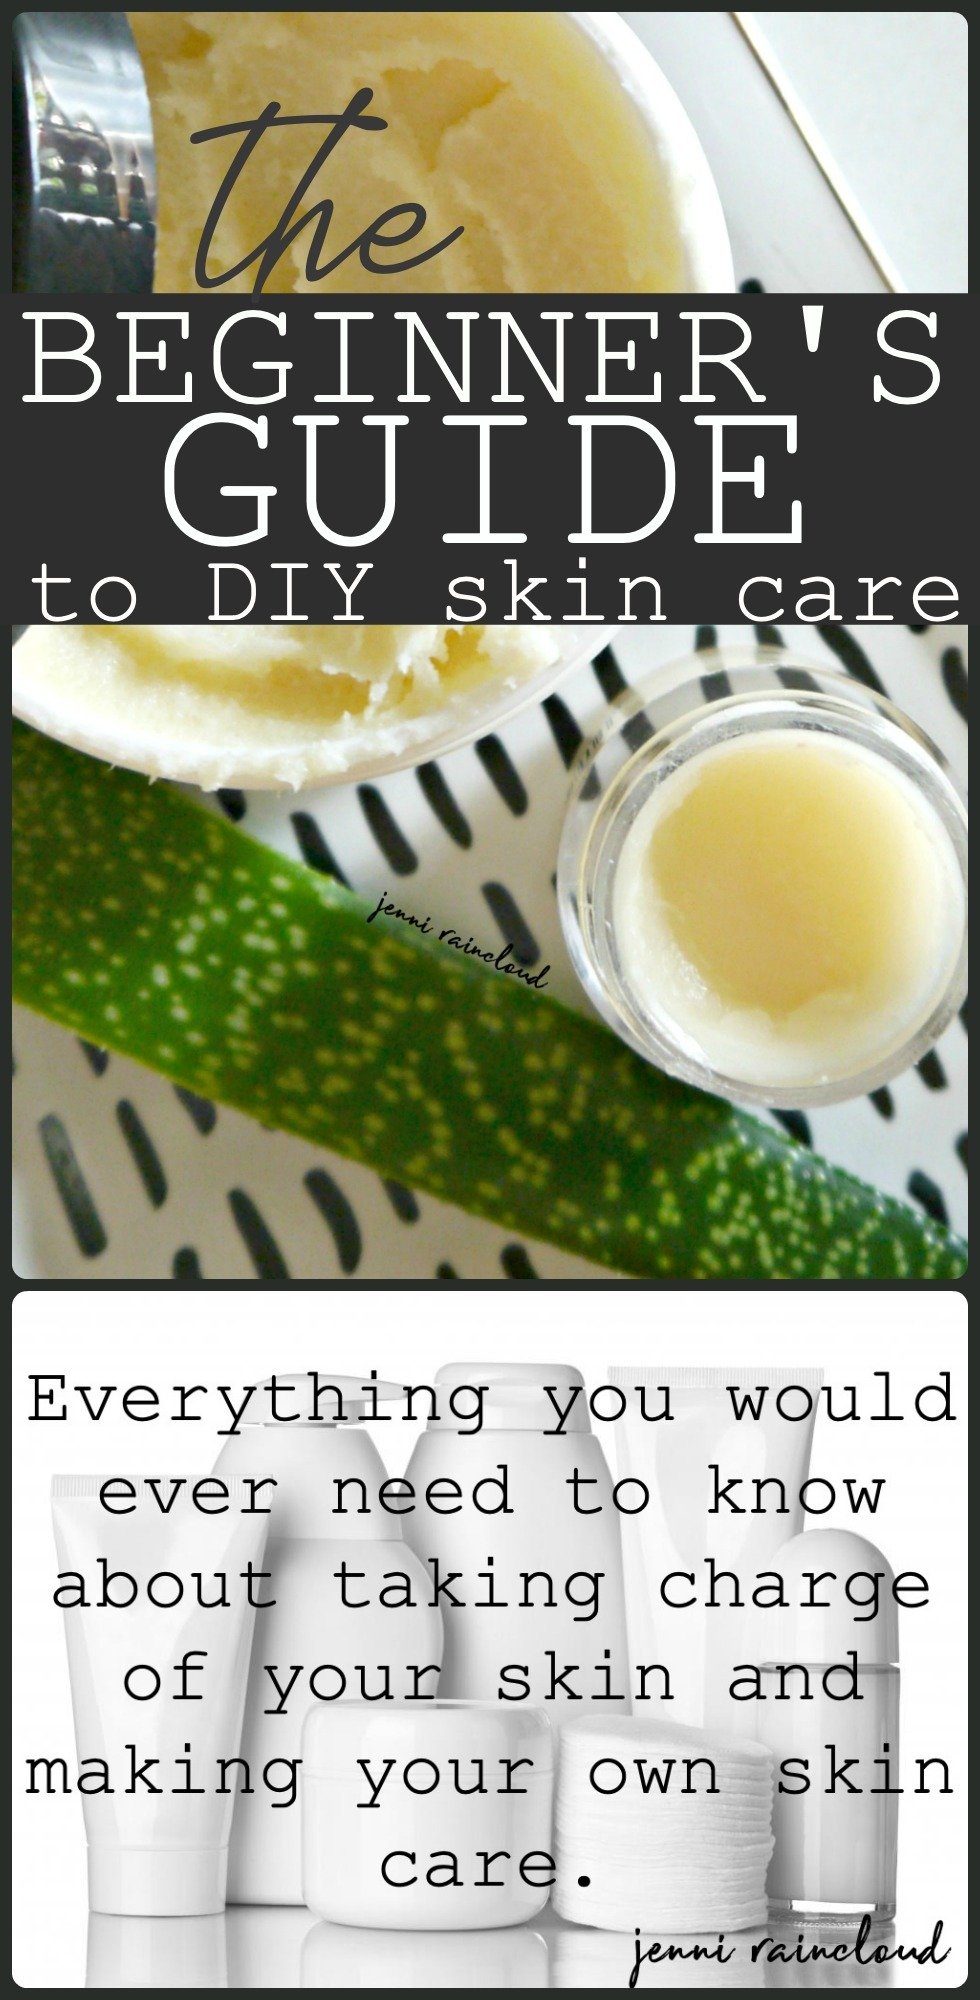 The Beginner's Guide to DIY Skin Care